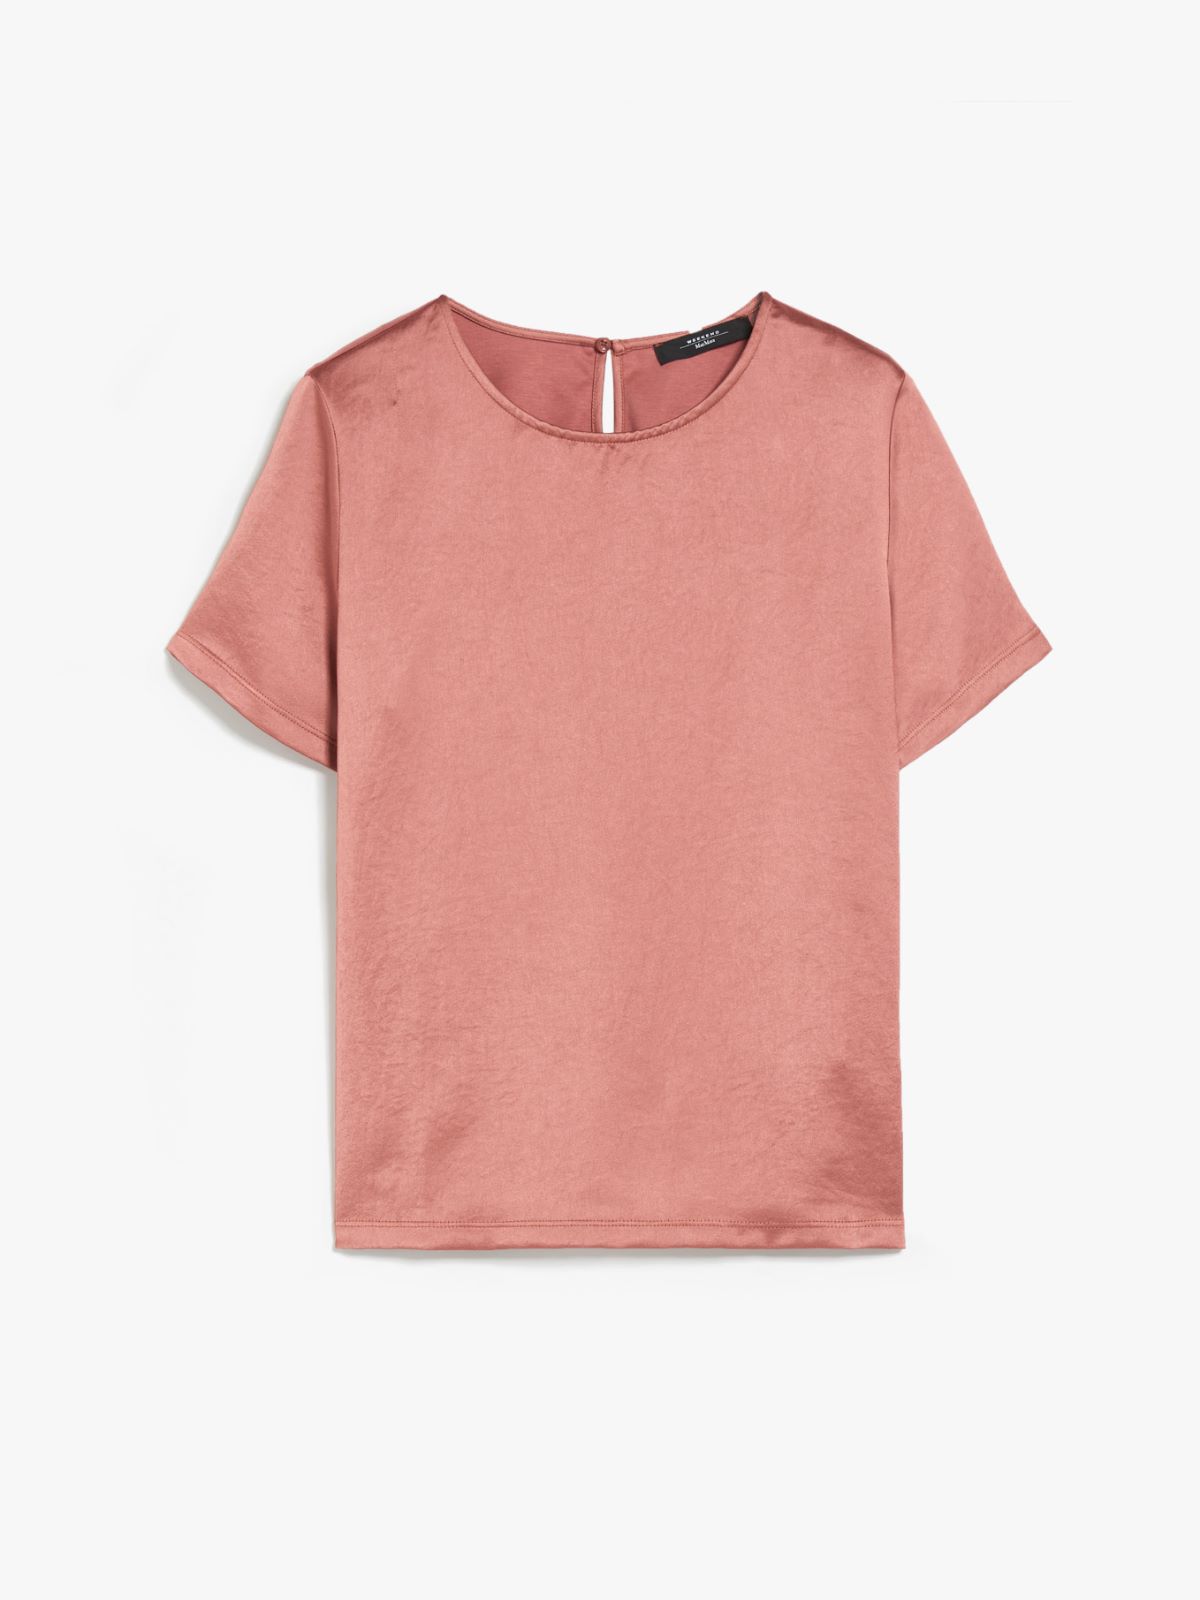 Blouse in satin and jersey - TERRA COTTA - Weekend Max Mara - 5